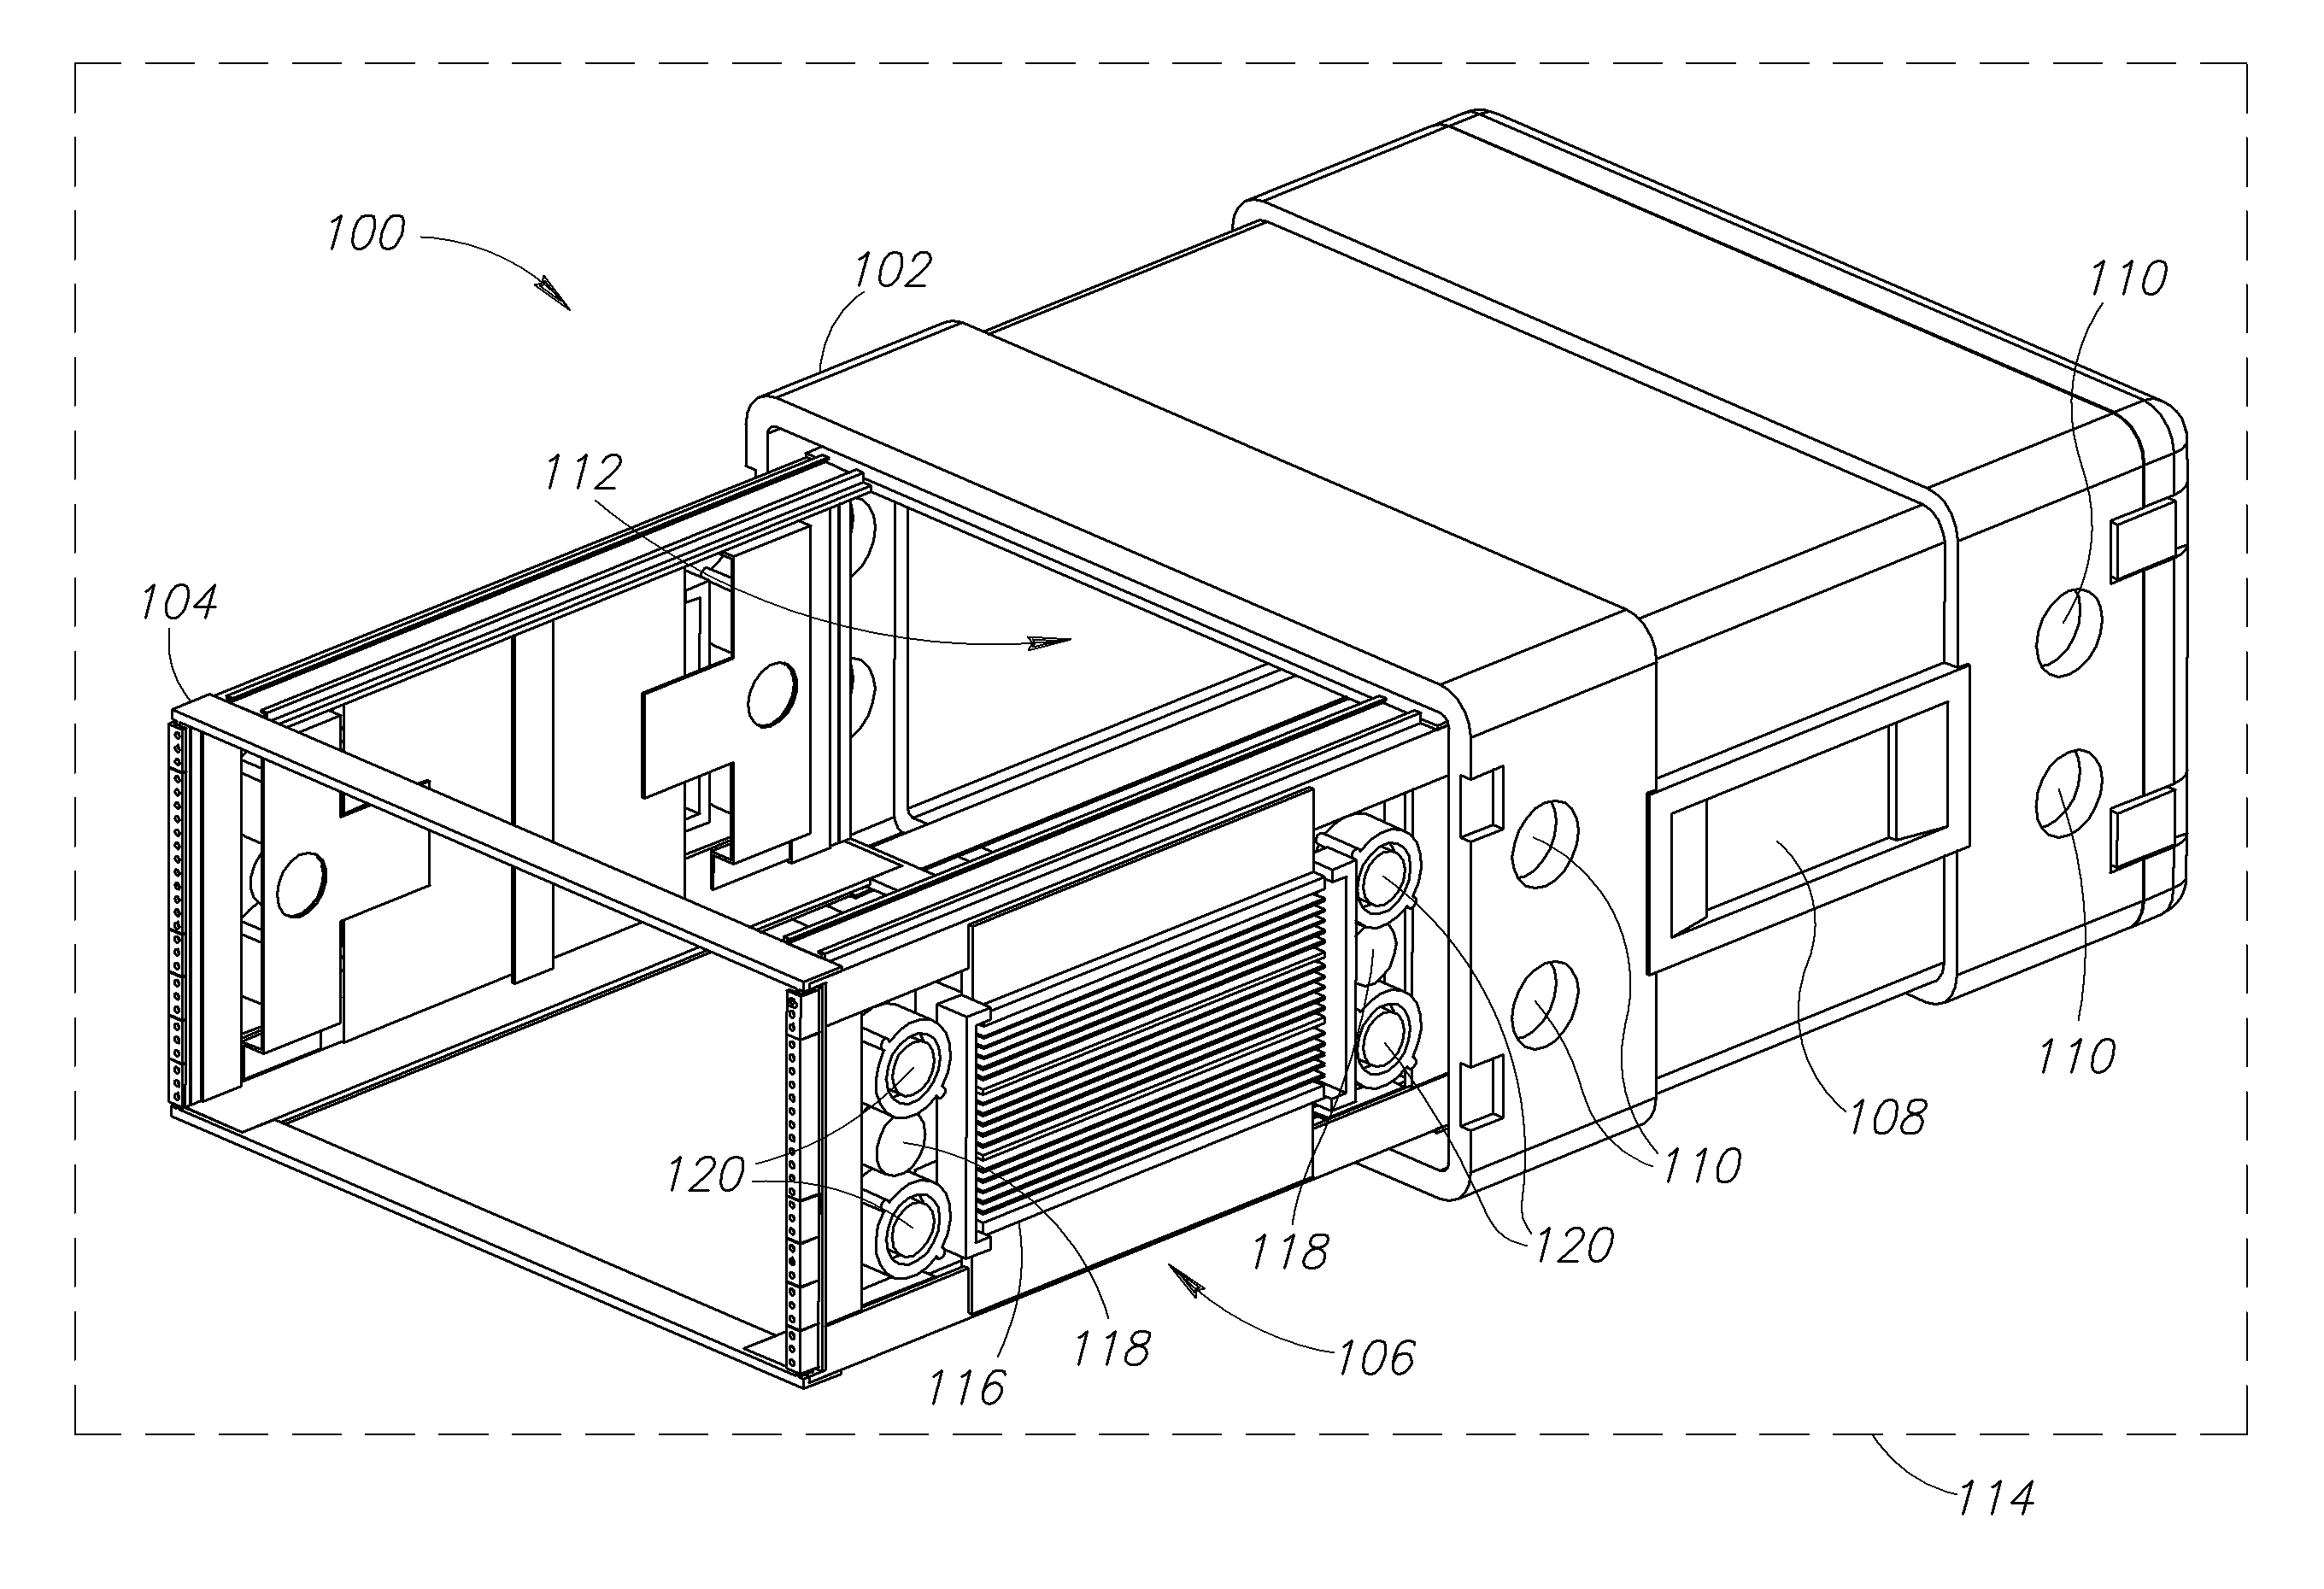 Cooling system for rack-mounted electronics equipment